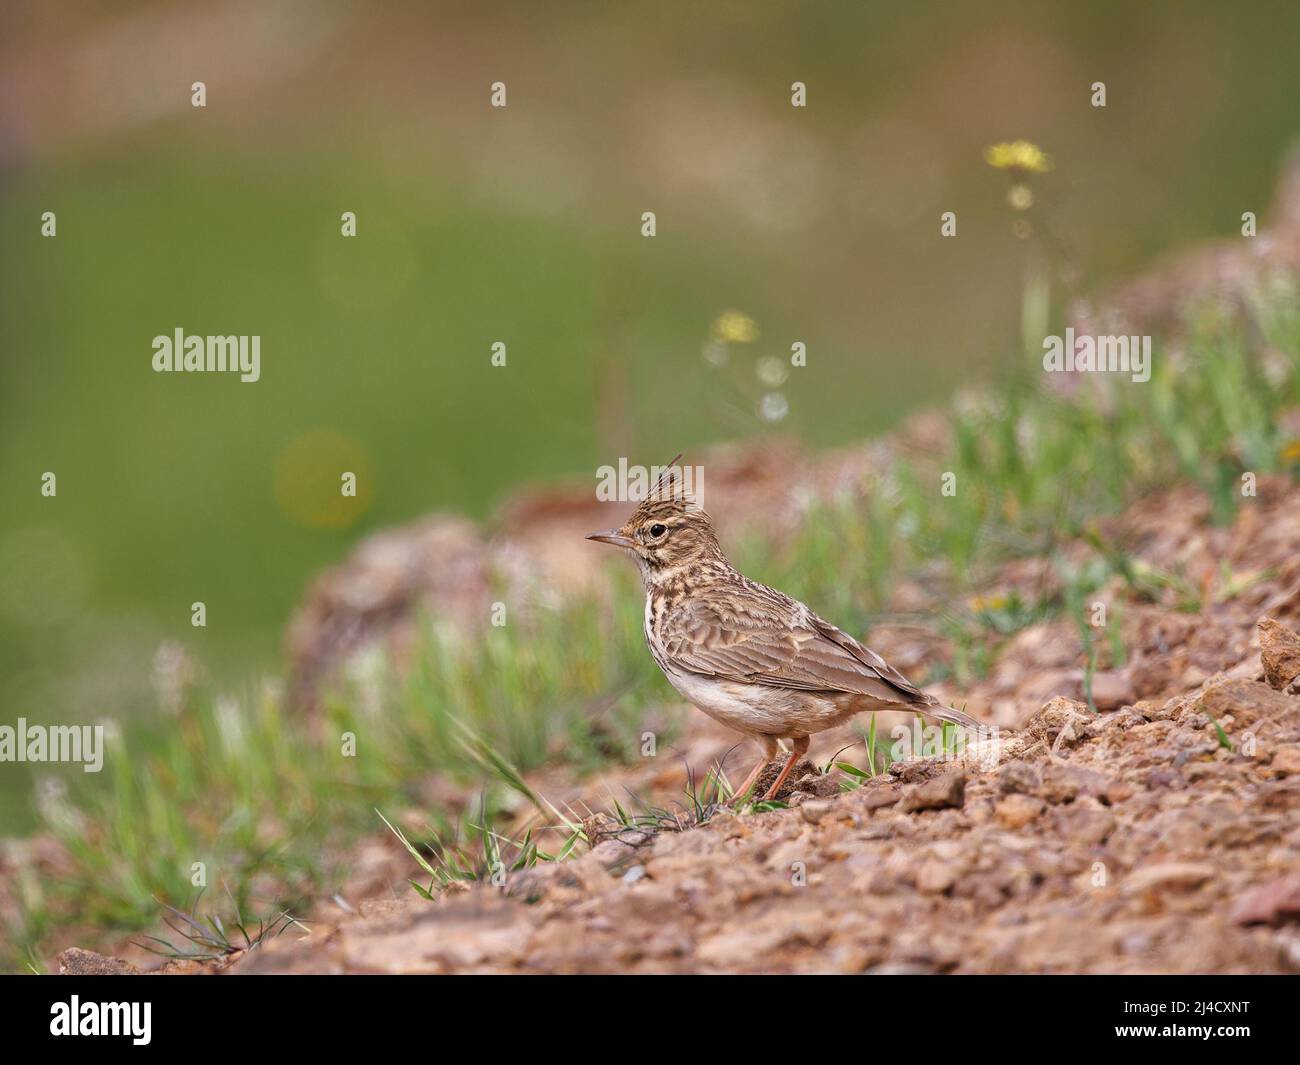 Crested Lark. Bird in its natural environment. Stock Photo